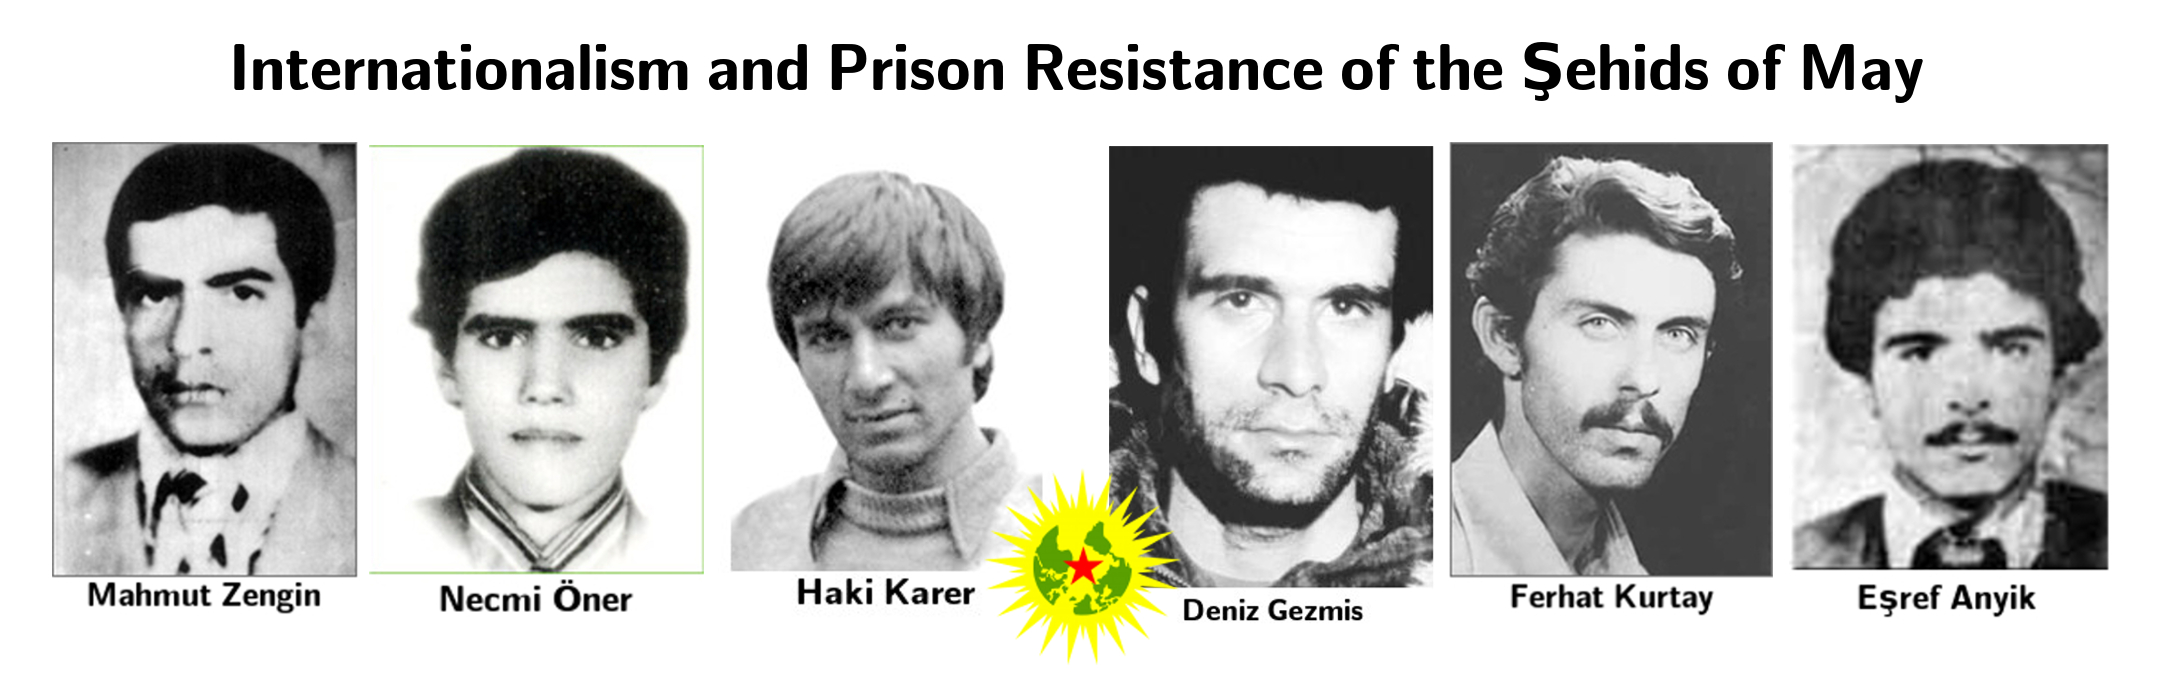 II. Remembering means fighting – Internationalism and Prison Resistance of the Şehids of May